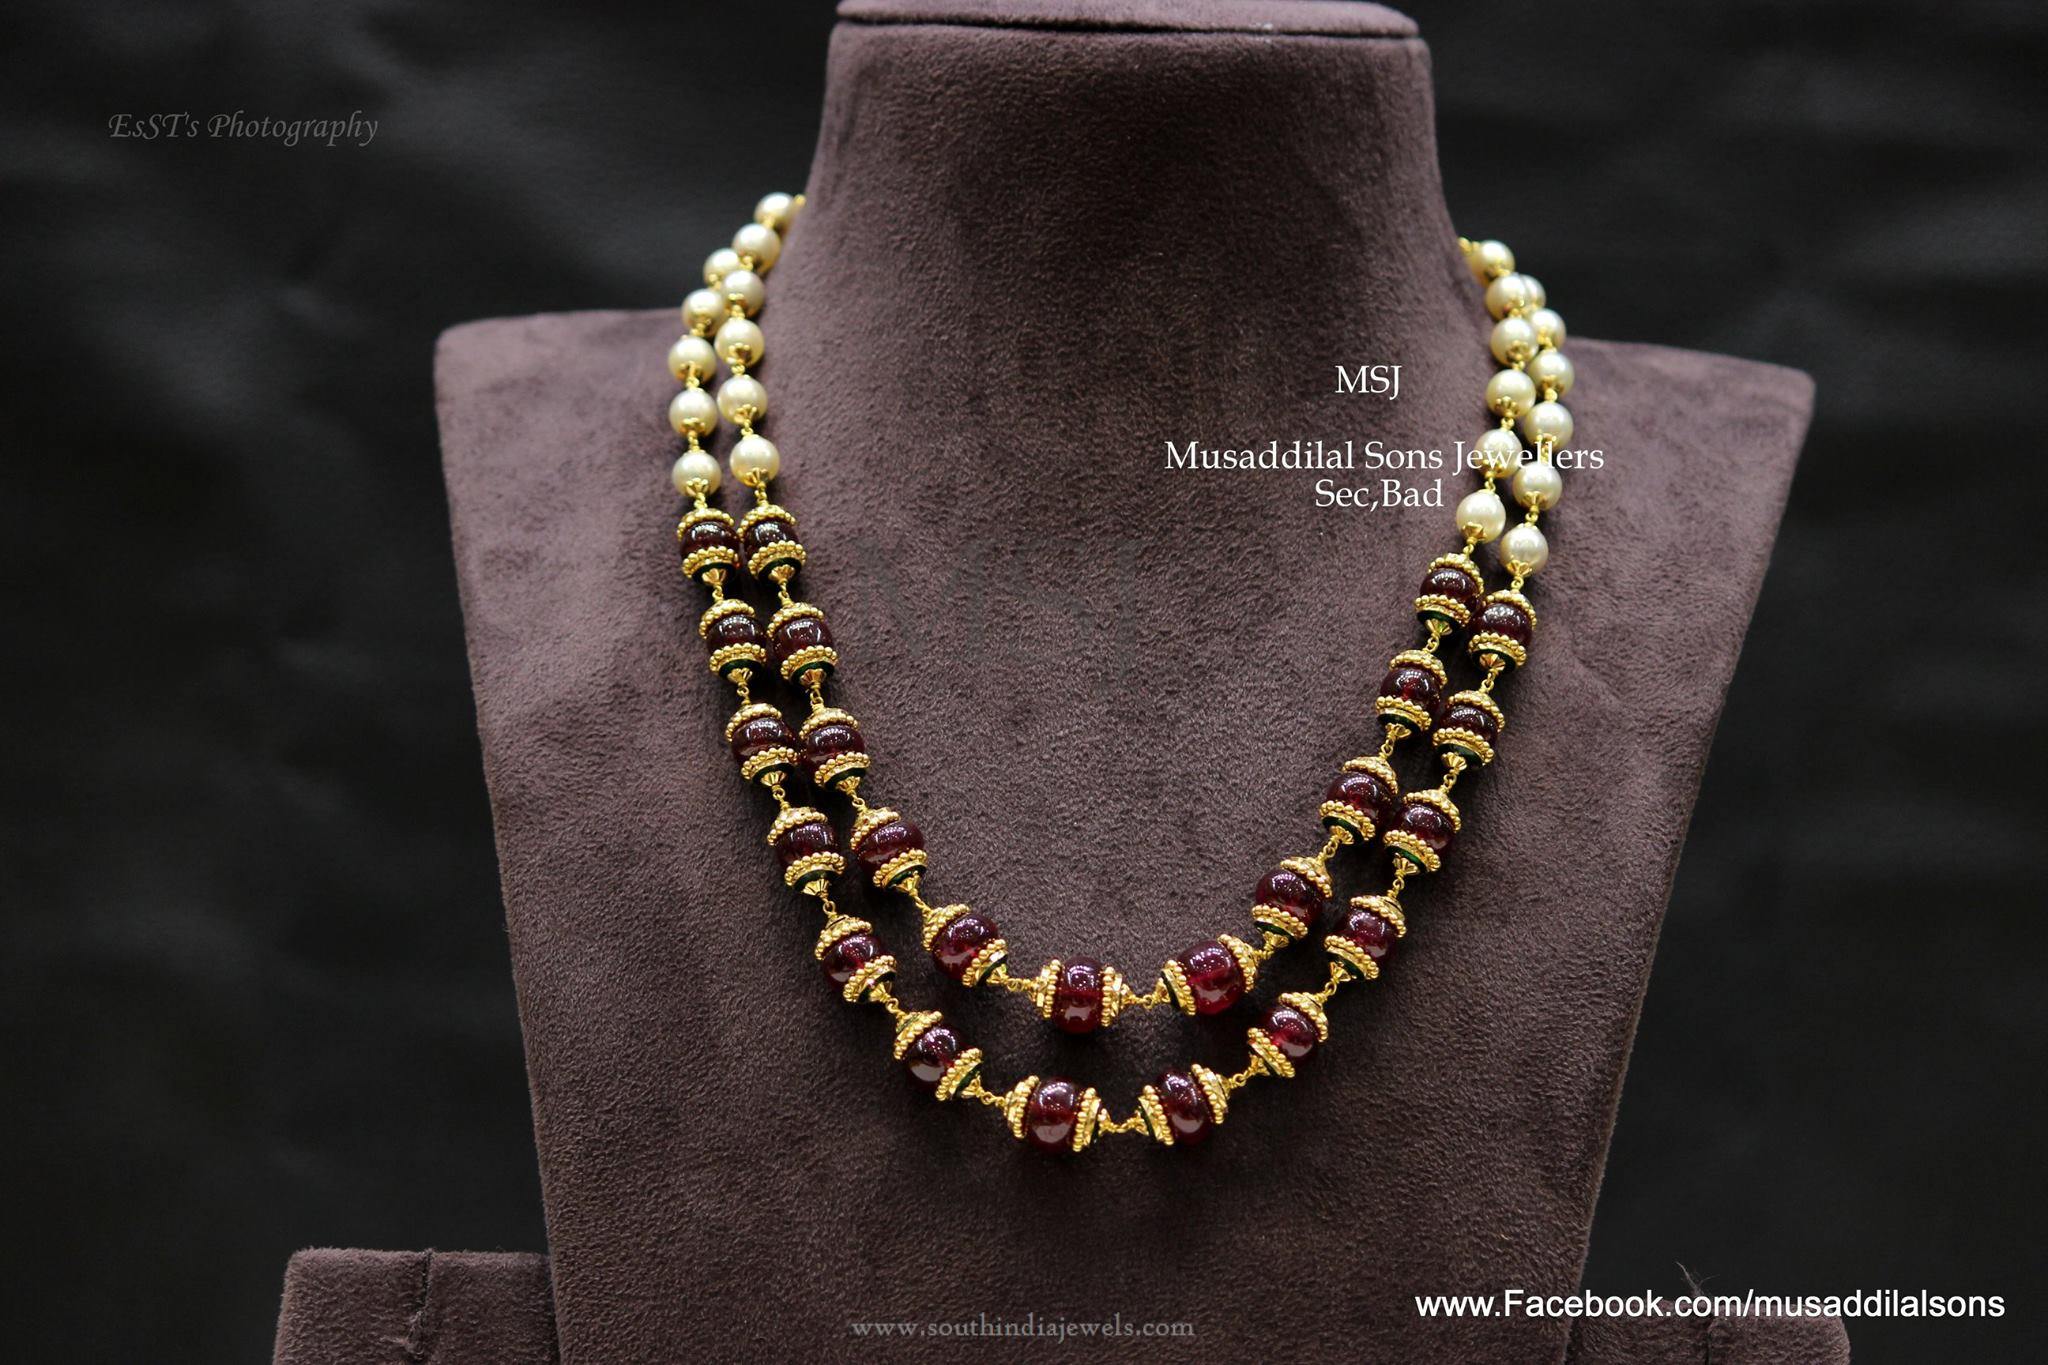 Gold Necklace with Beads Designs - South India Jewels